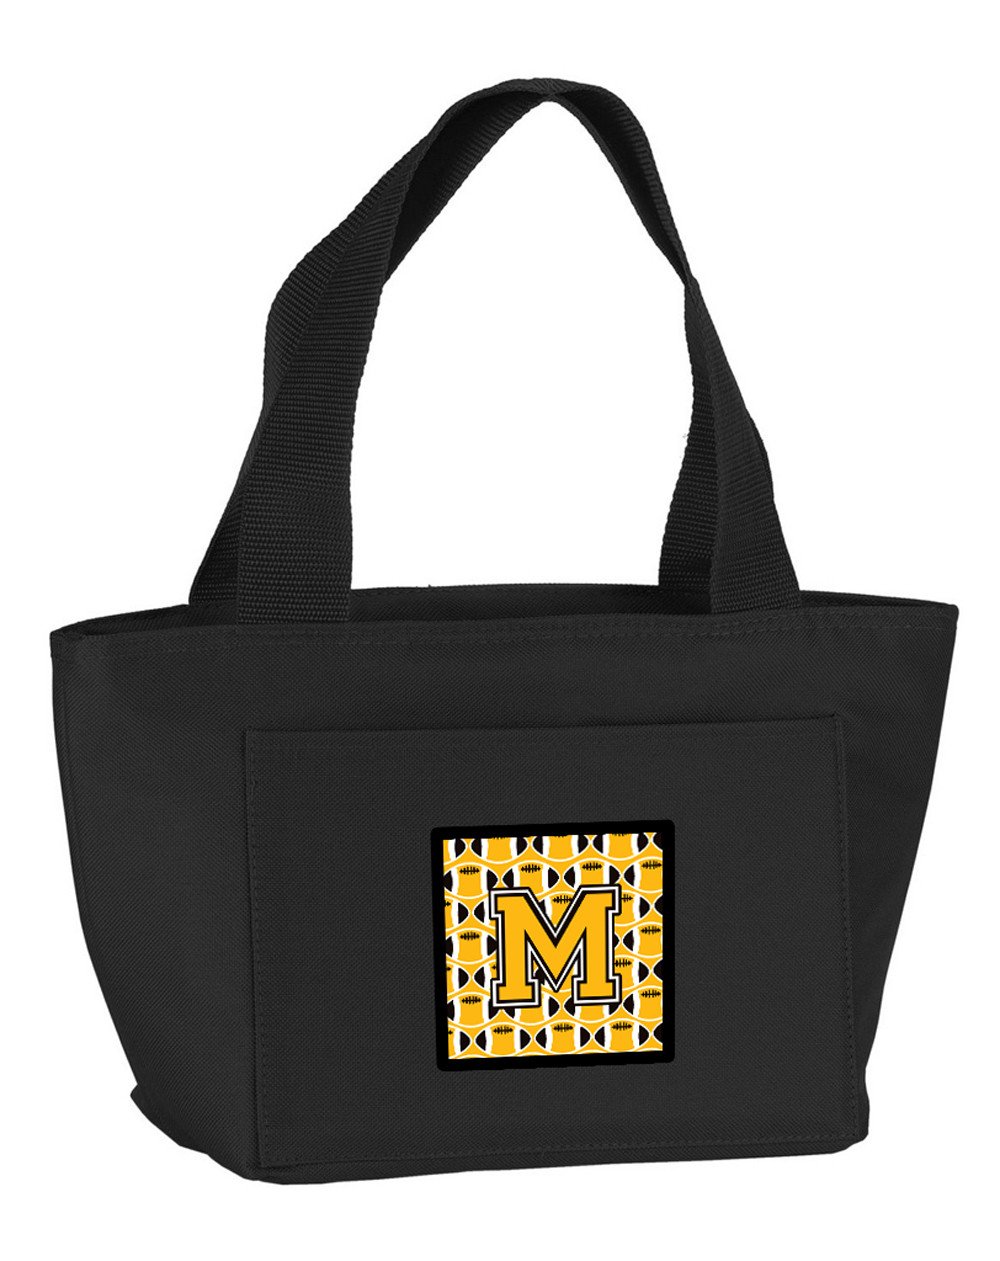 Letter M Football Black, Old Gold and White Lunch Bag CJ1080-MBK-8808 by Caroline's Treasures